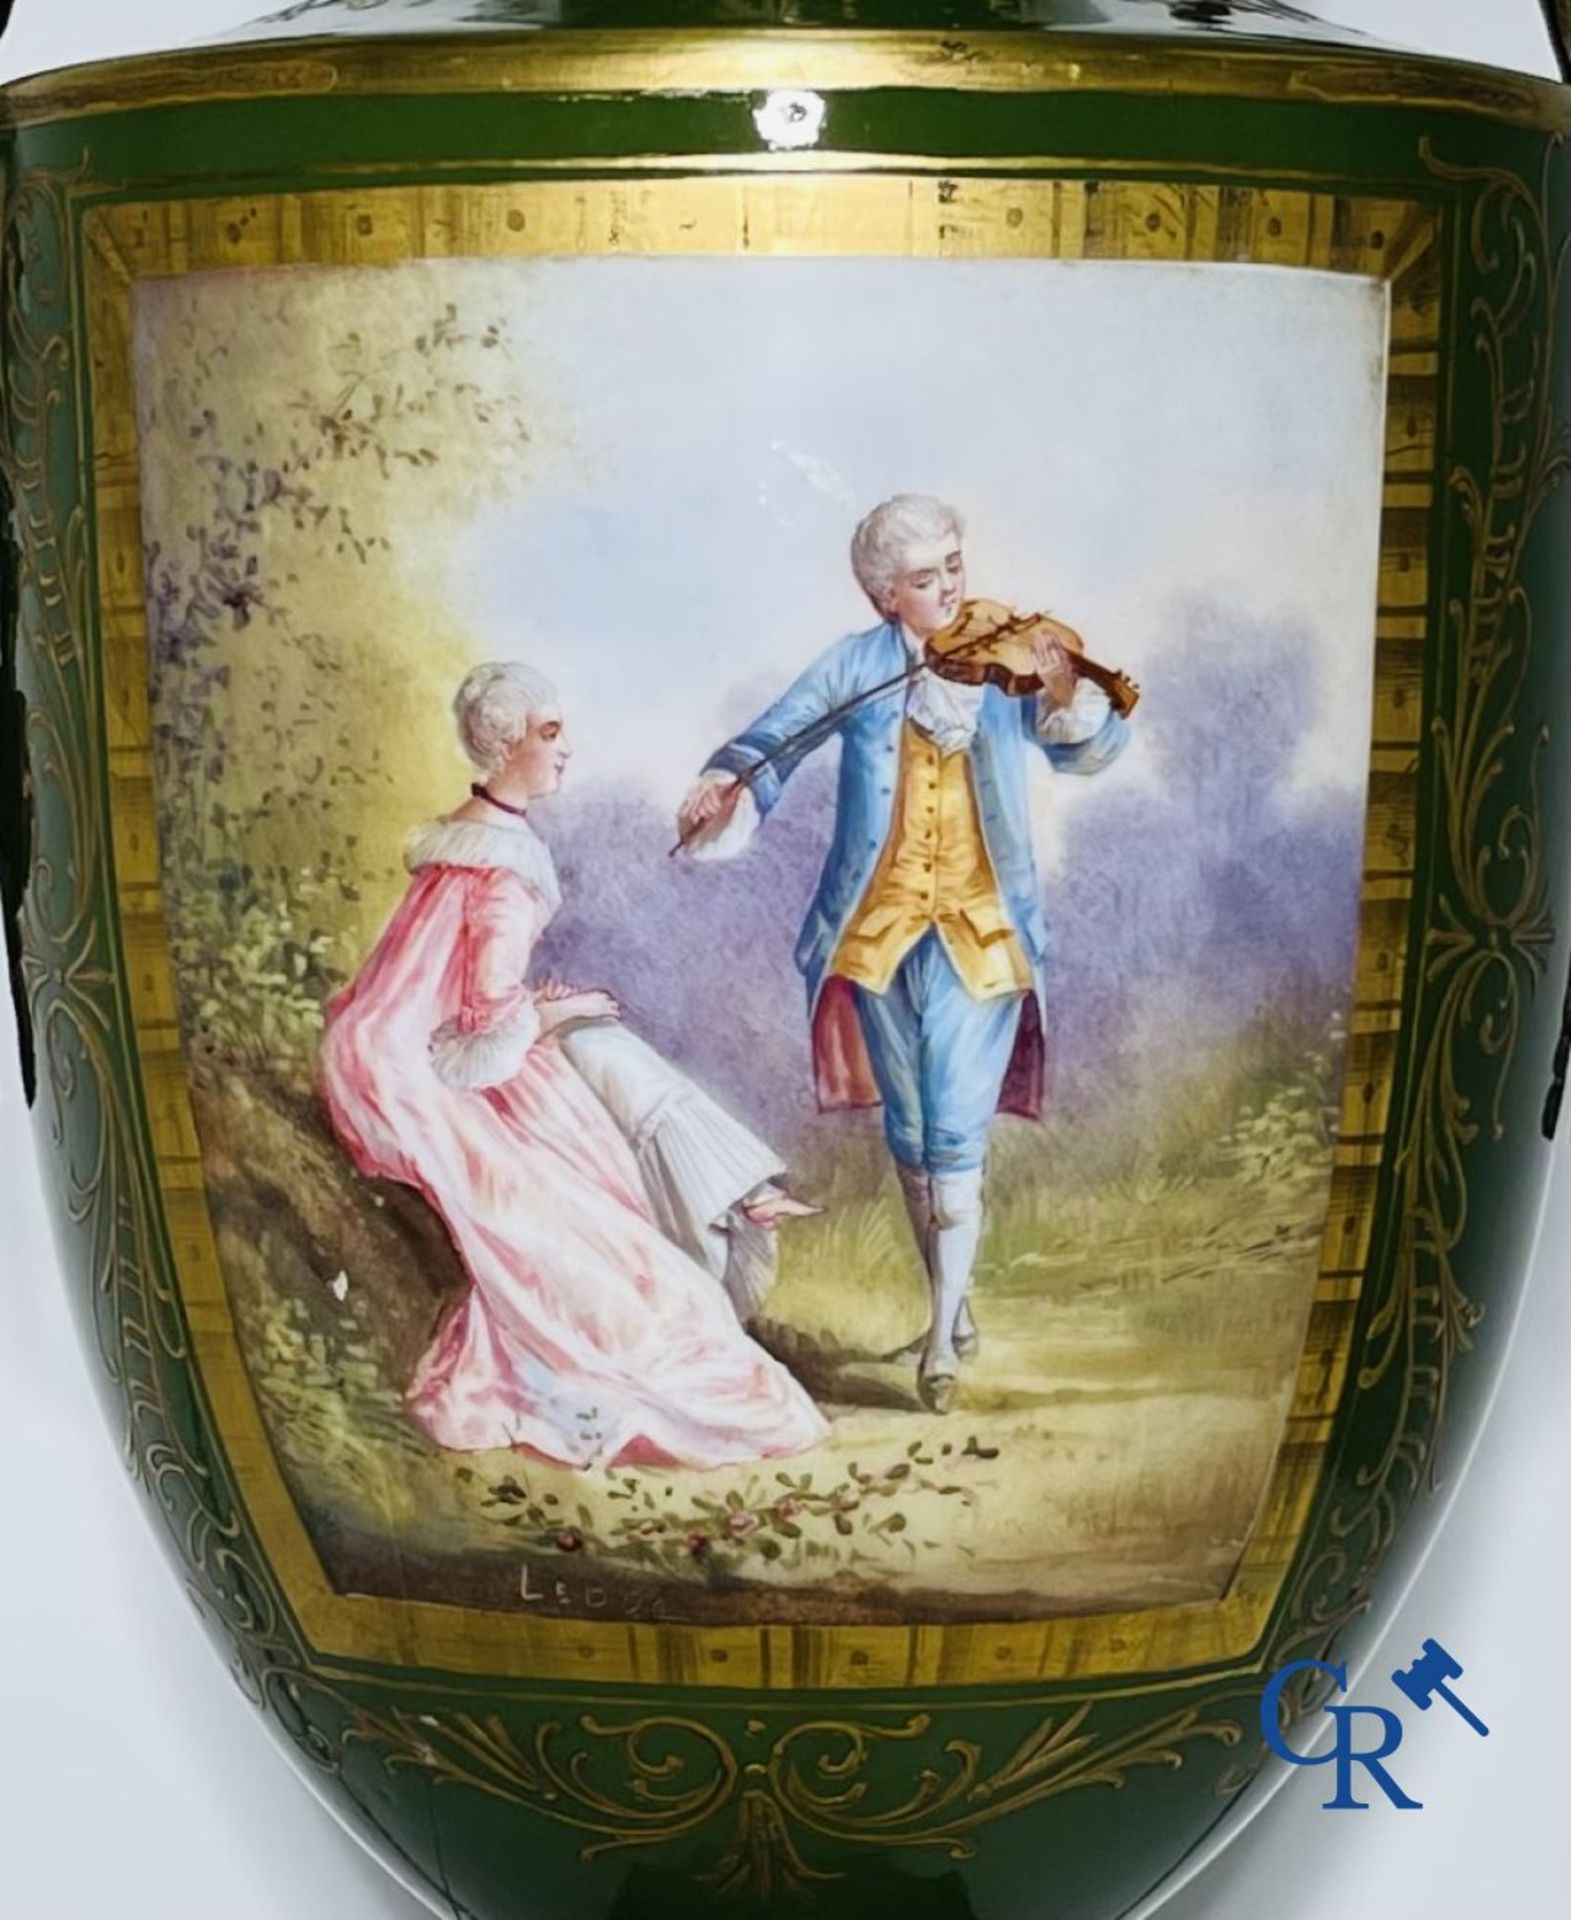 Sèvres: Pair of vases in Sevres porcelain and bronze. signed Leduc. - Image 5 of 7